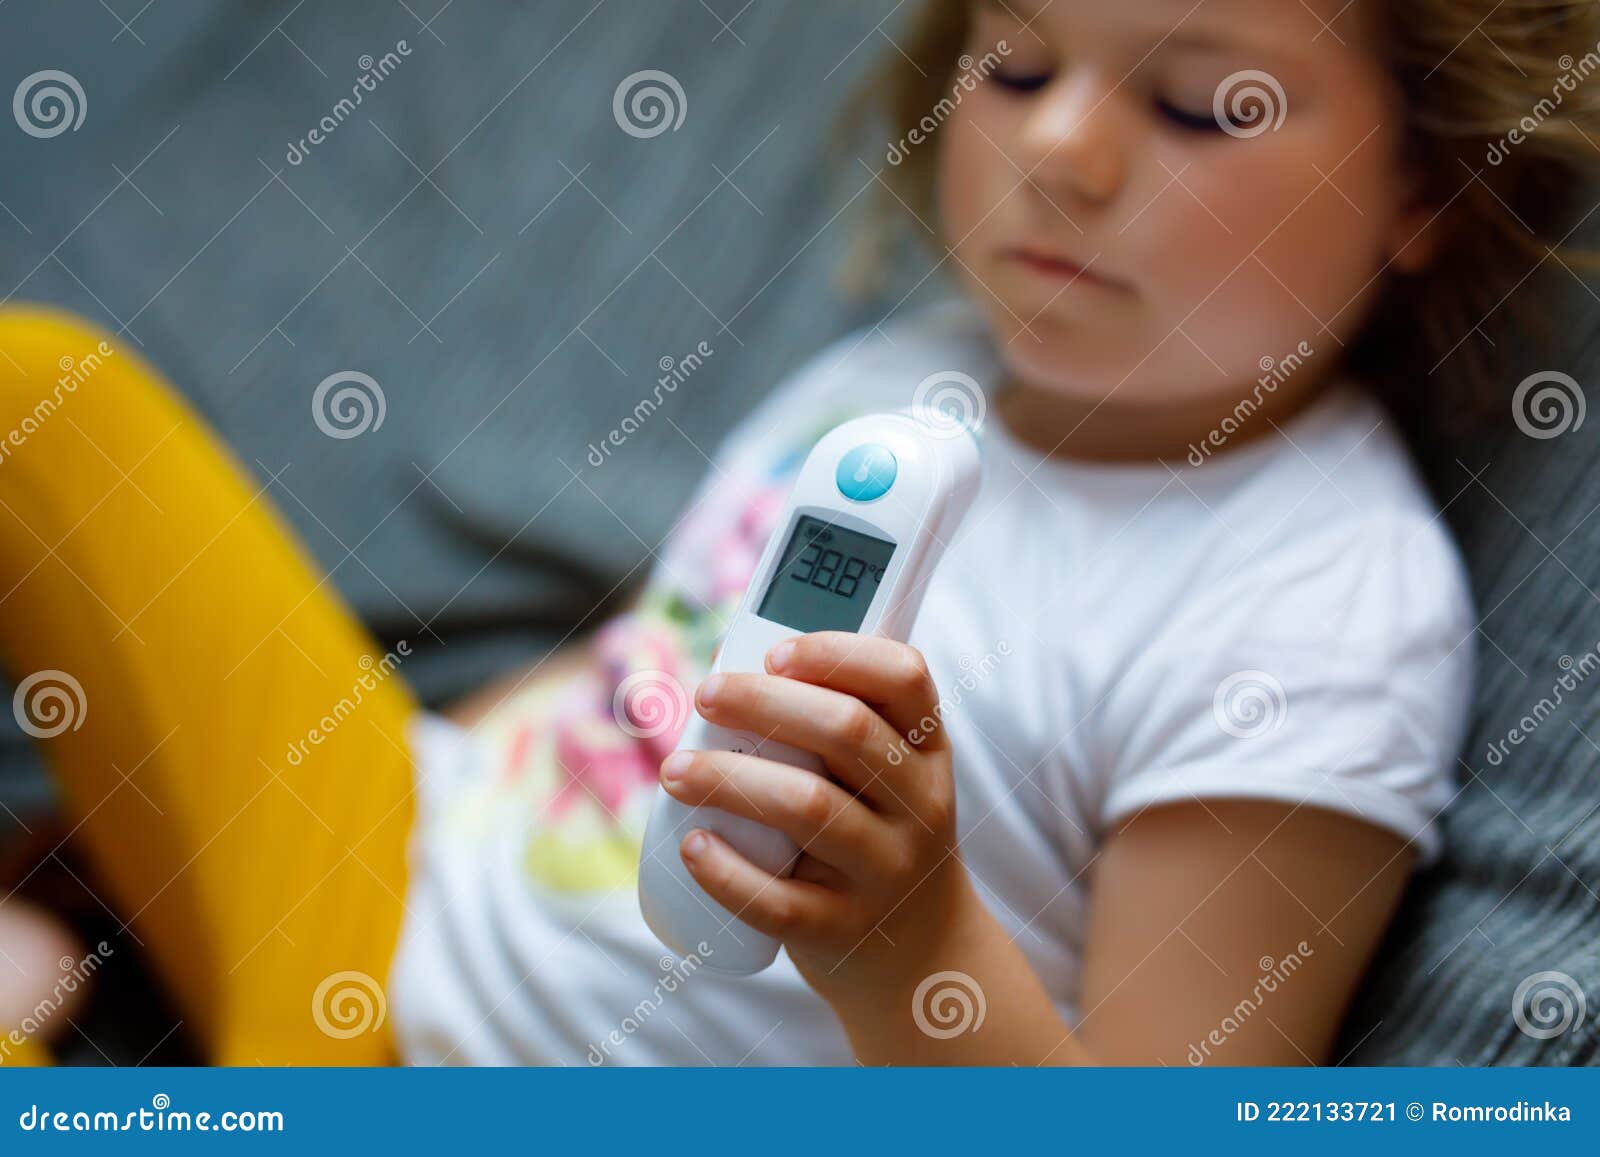 Preschool Girl Takes Temperature and Feeling Sick. Toddler Child with  Infrared in Ear Thermometer at Home, High Grade Stock Image - Image of child,  covid19: 222133721